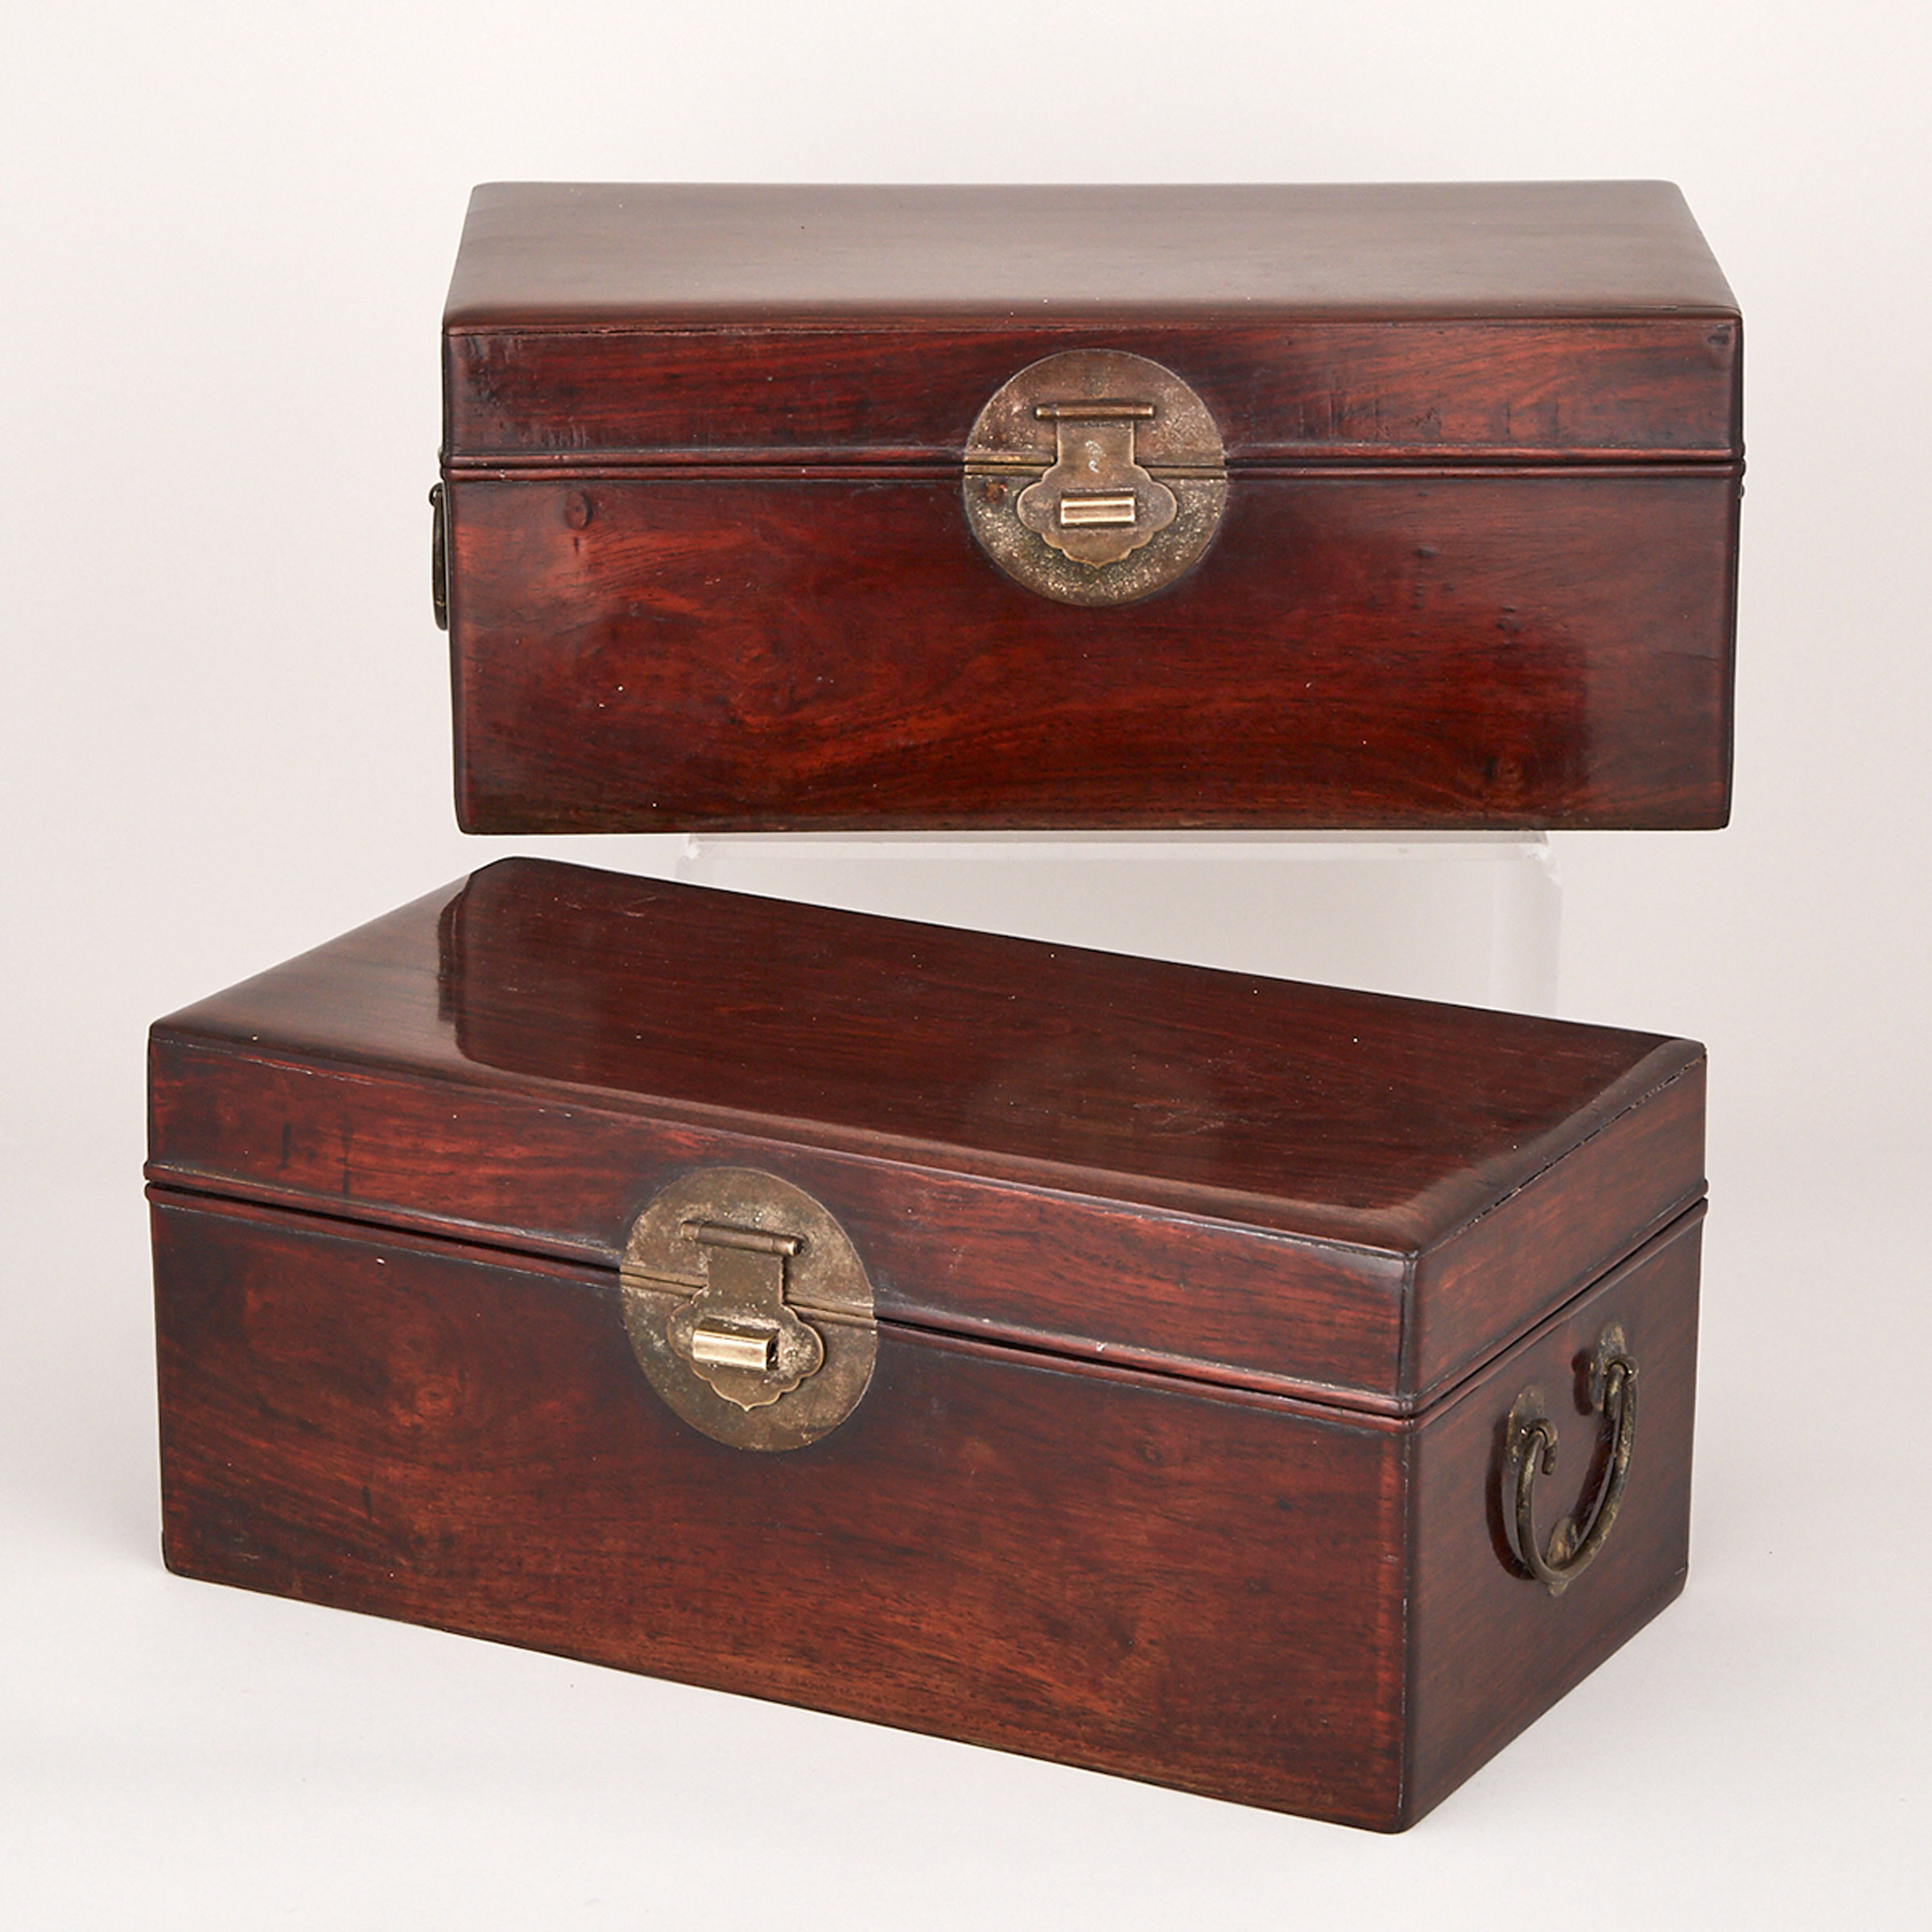 A Pair of Huanghuali Scholar’s Boxes, 19th Century